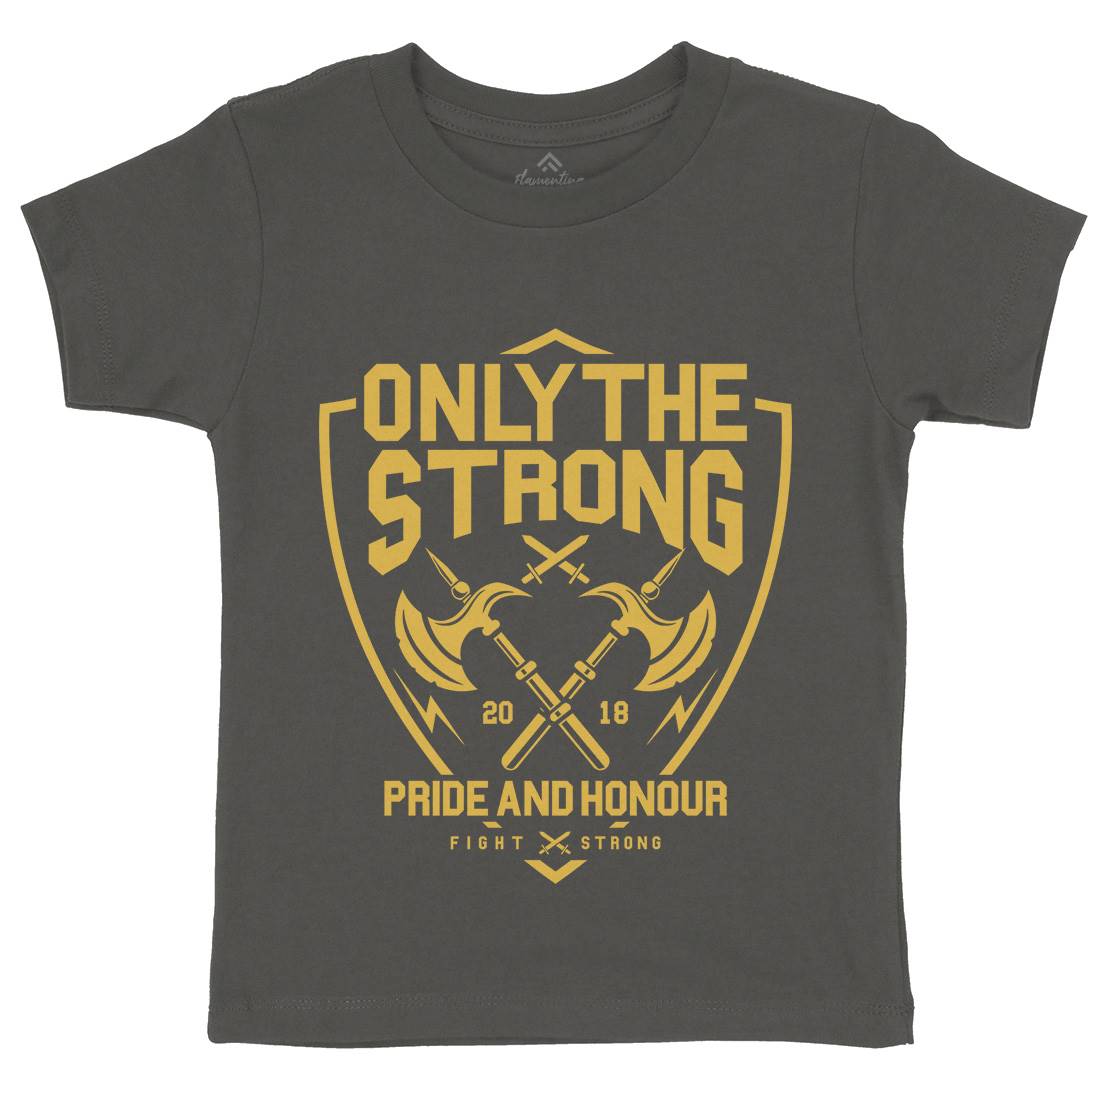 Only The Strong Kids Crew Neck T-Shirt Quotes A257